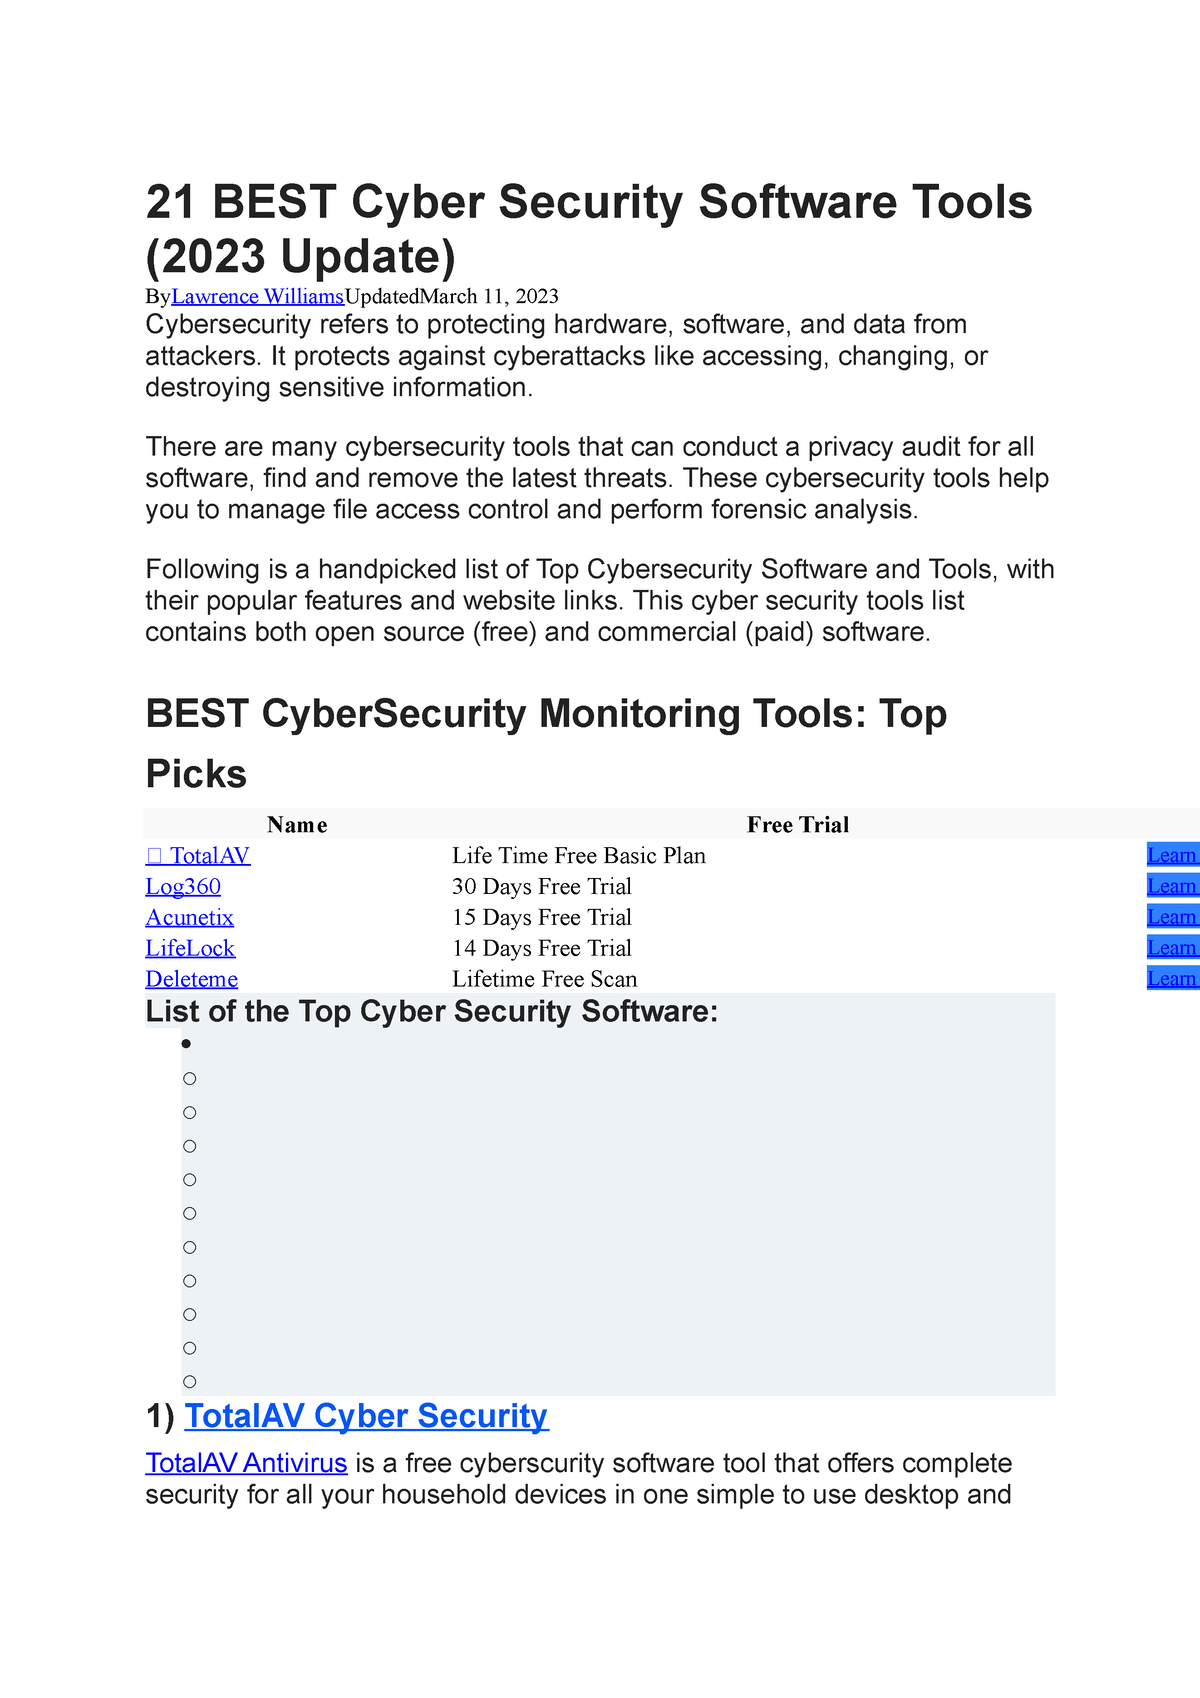 21 BEST Cyber Security Software Tools - It protects against cyberattacks  like accessing, changing, - Studocu